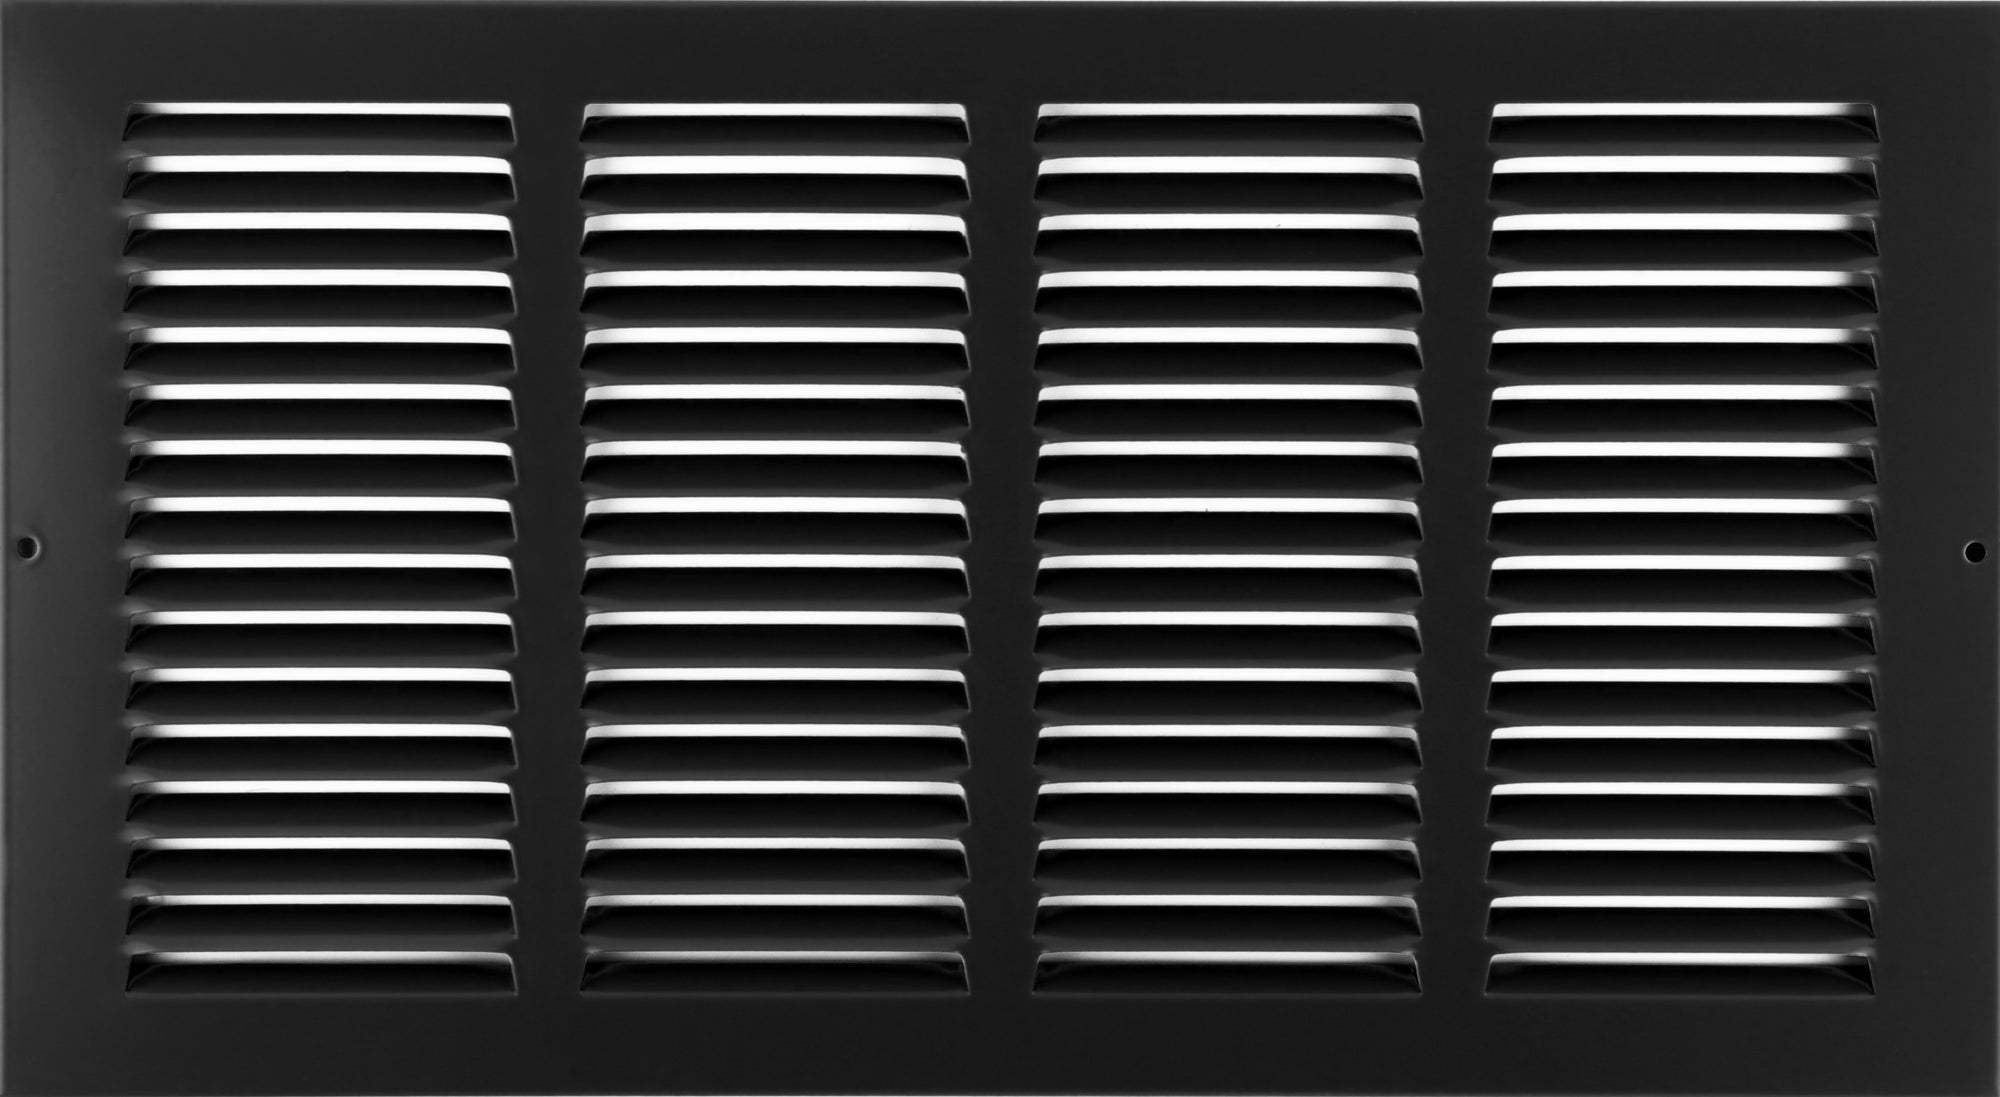 14" X 8" Air Vent Return Grilles - Sidewall and Ceiling - Steel